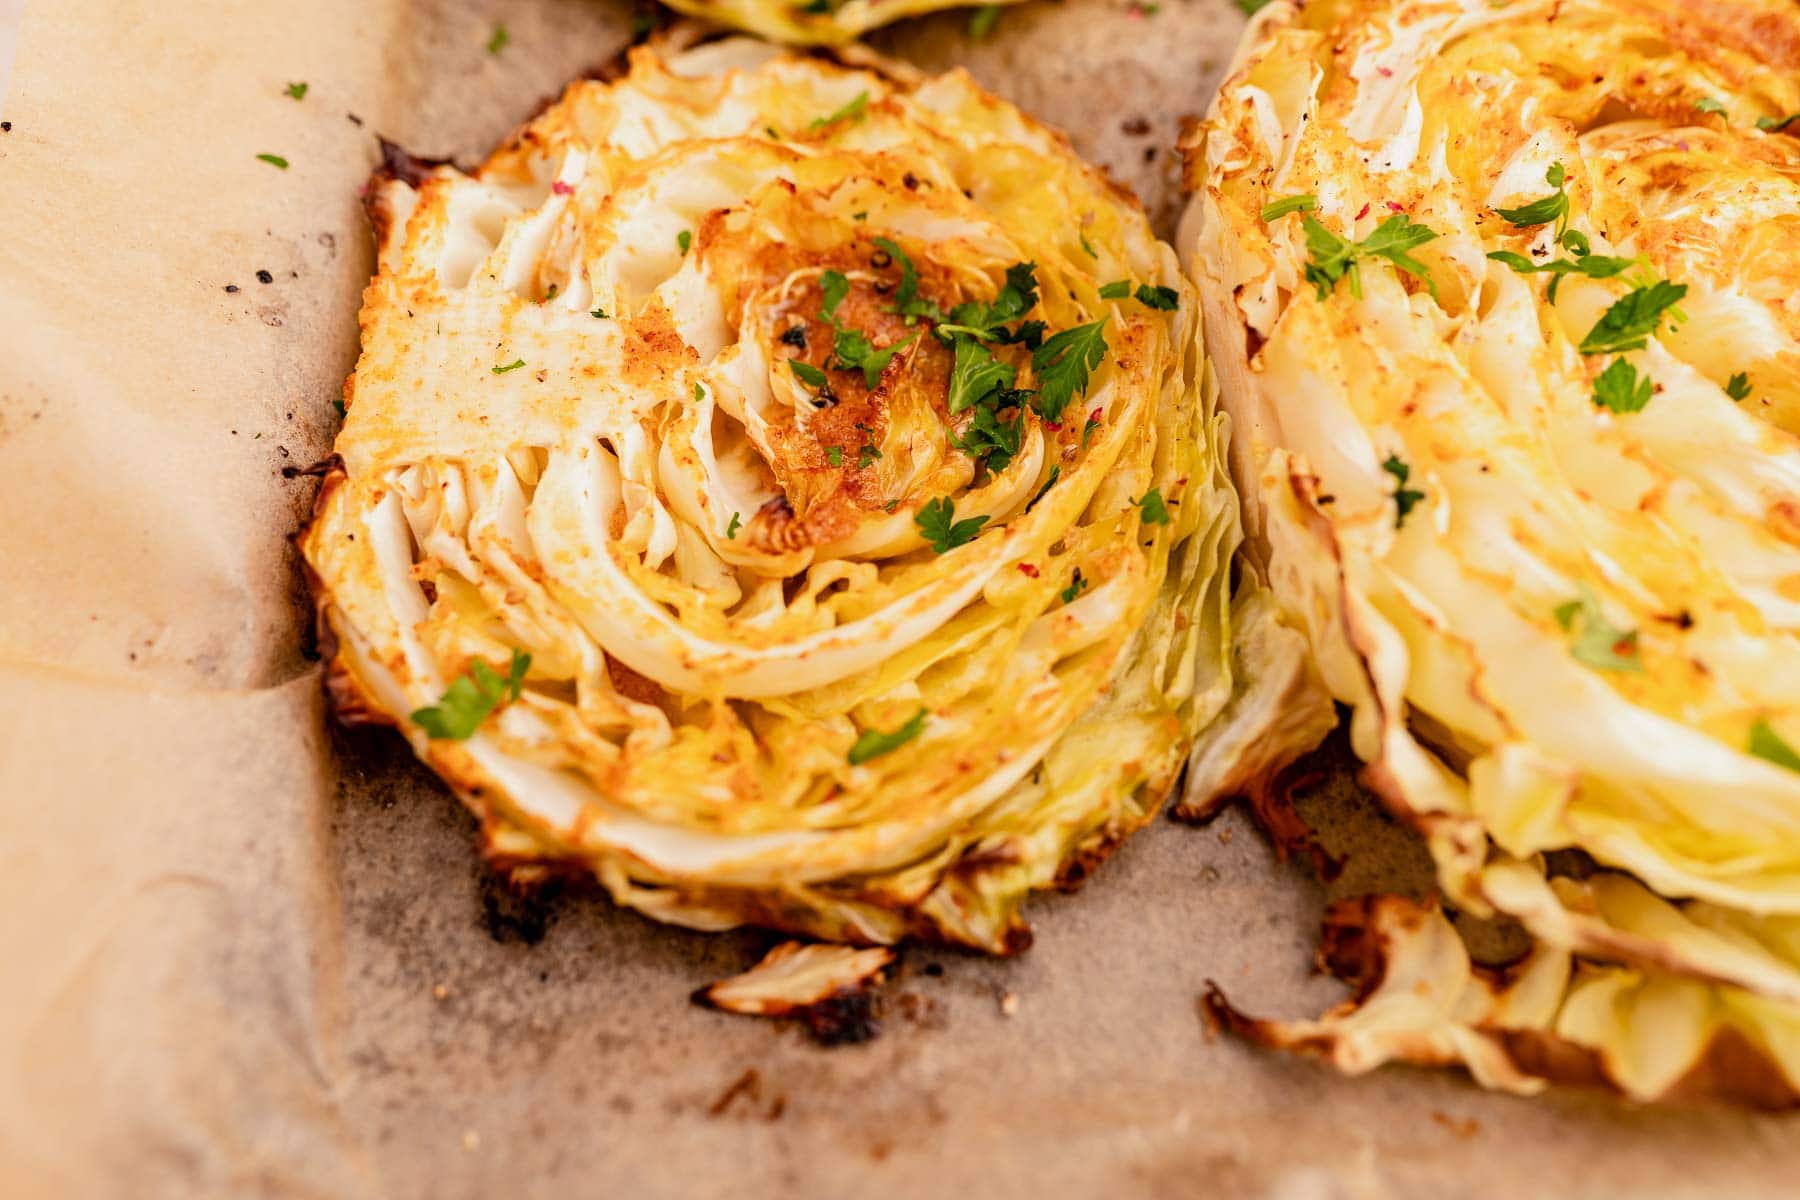 Roasted cabbage steaks seasoned with spices and garnished with parsley on parchment paper.